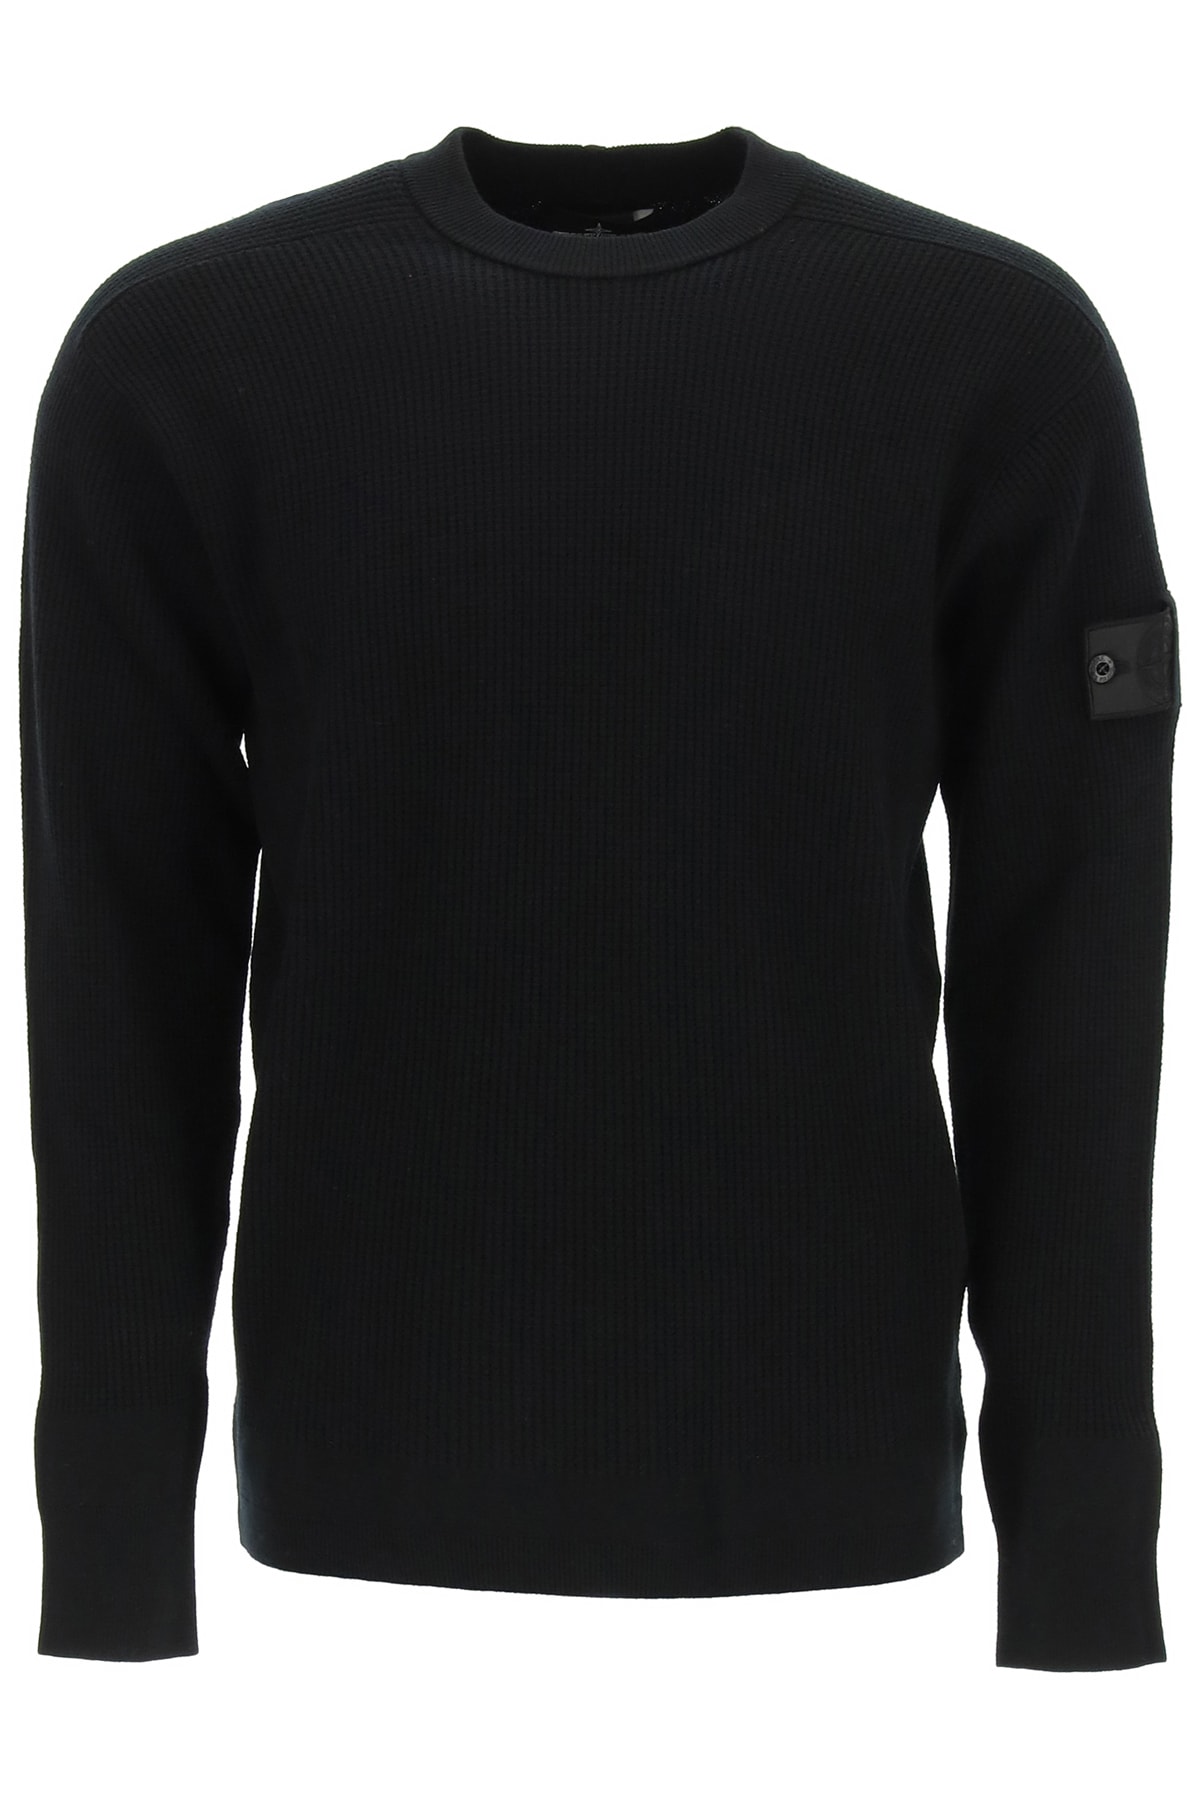 Stone Island Shadow Project Textured Wool Blend Crewneck Sweater